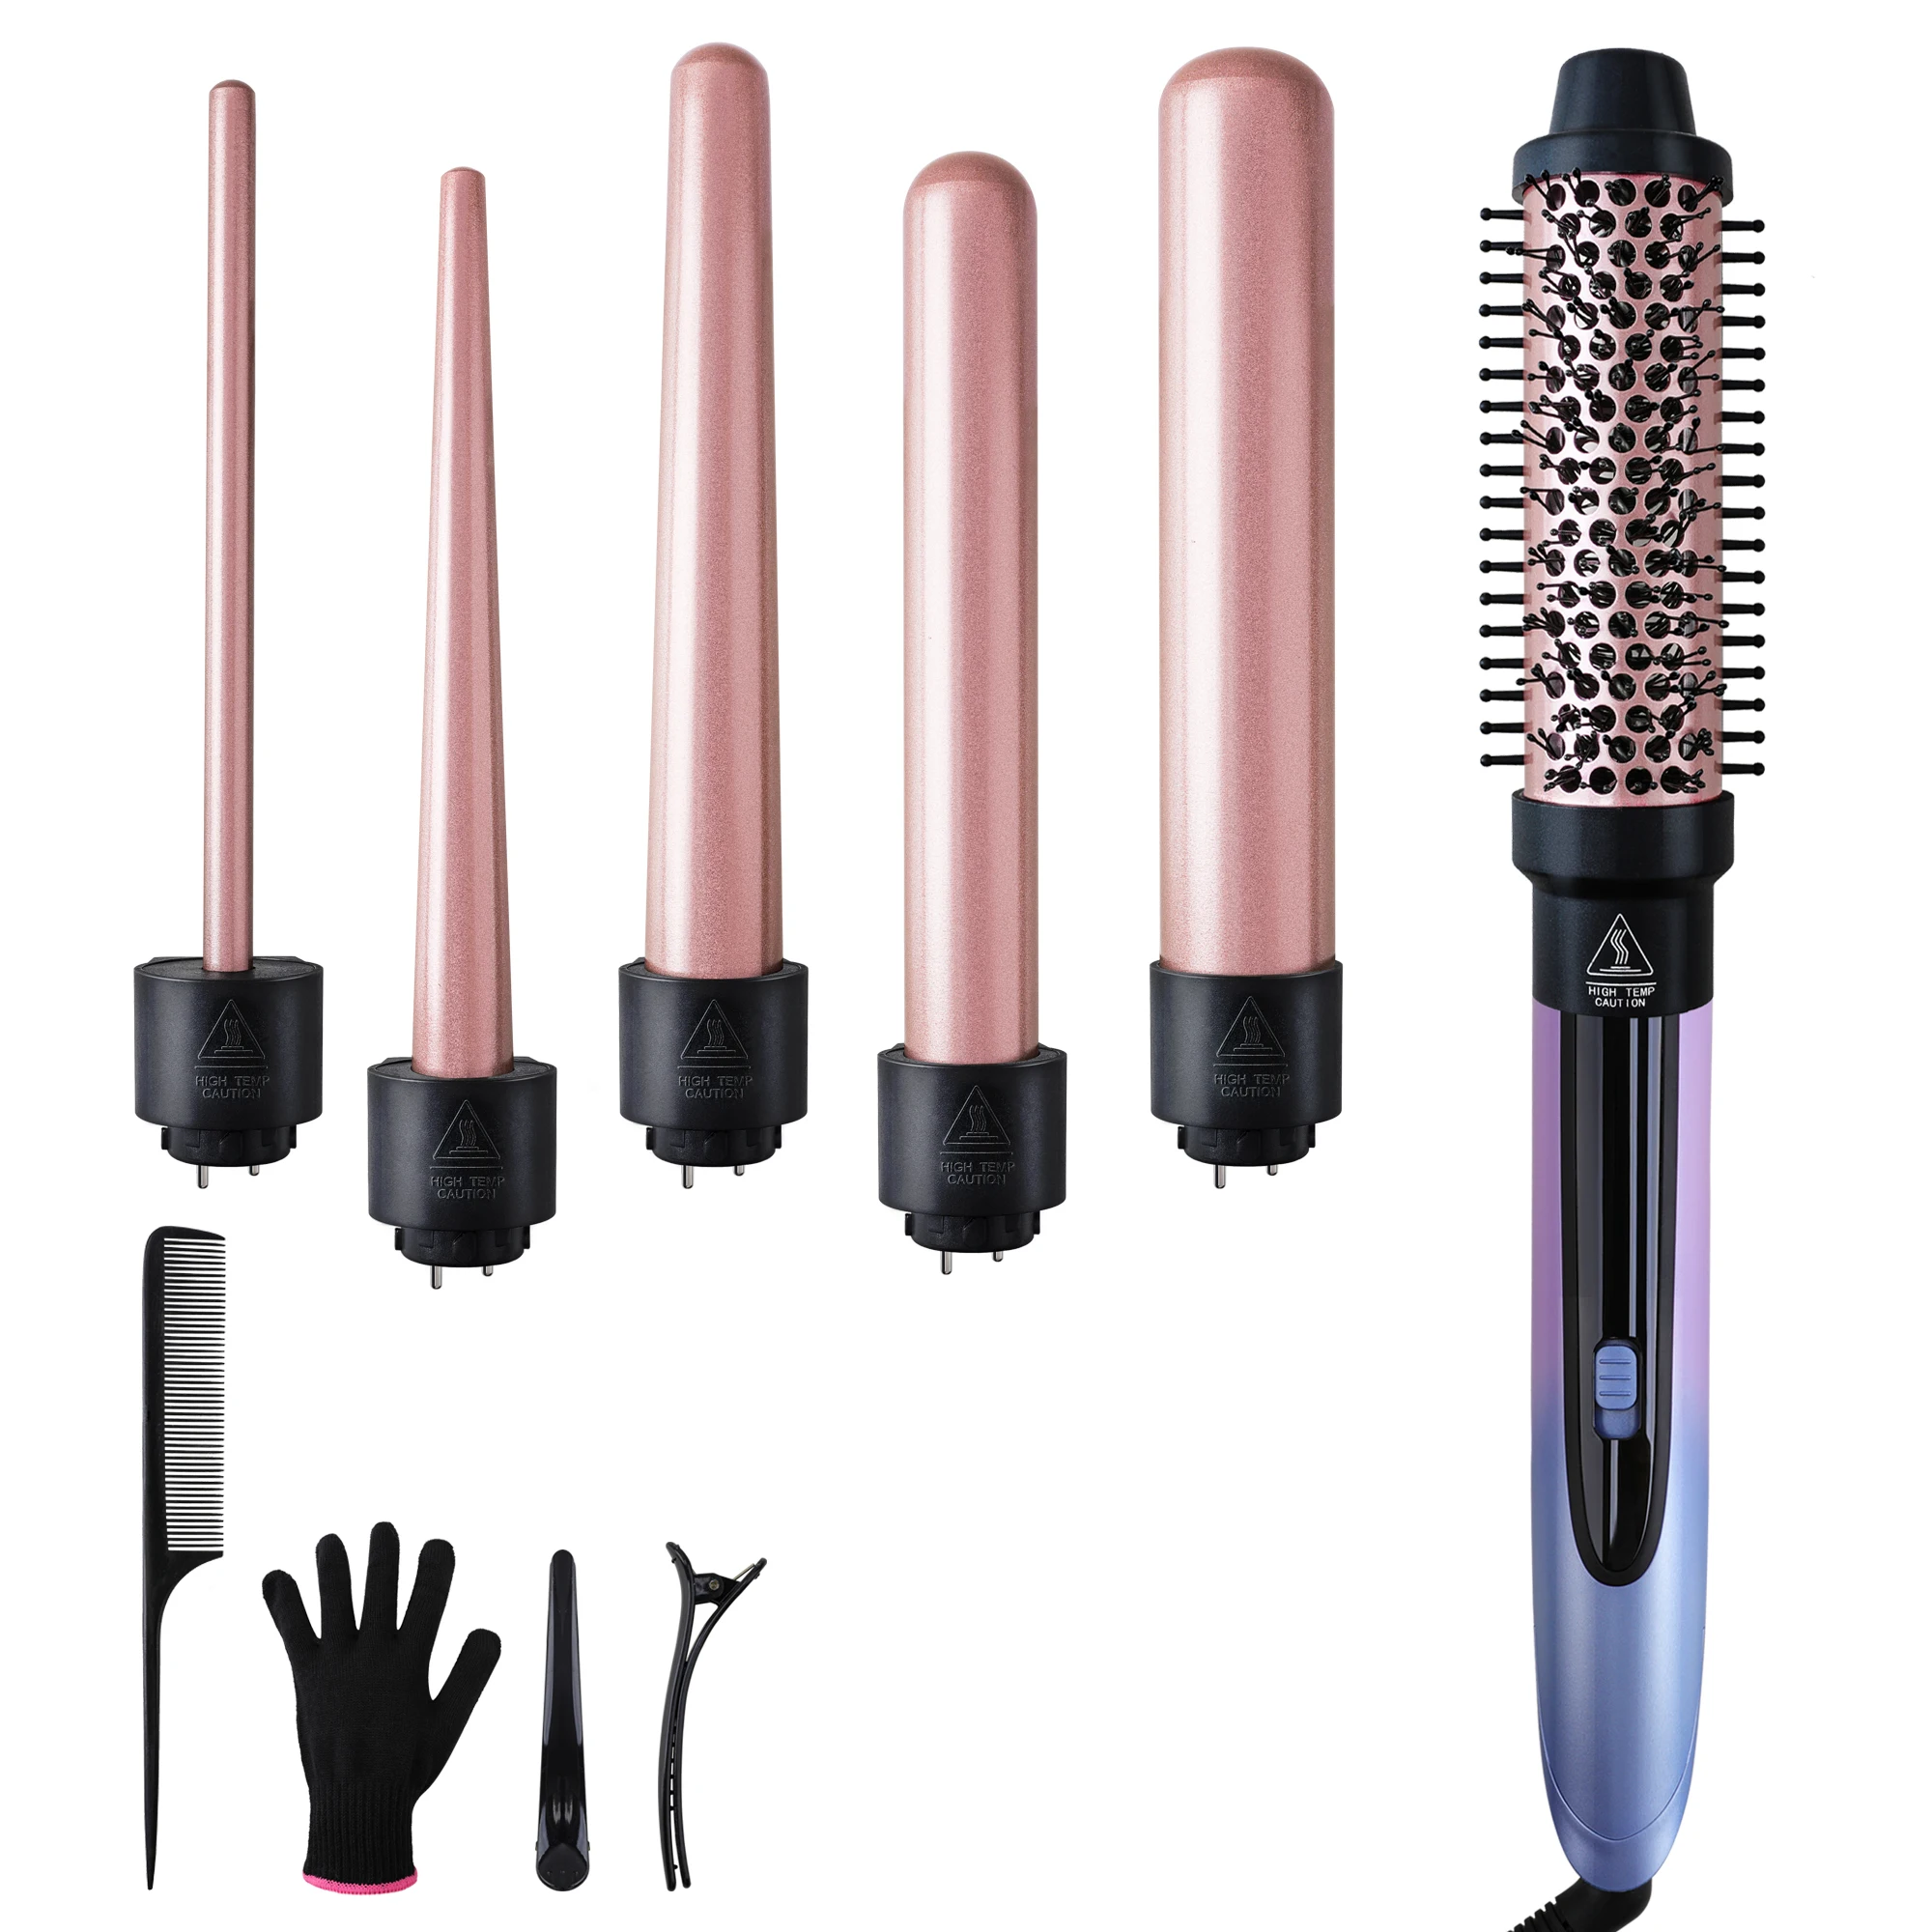 

Hair Curling Wand With Interchangeable 6 Barrels Hair Curler 6 in 1 Curling Iron Crimper Waver Home Use For Women Girls Styling